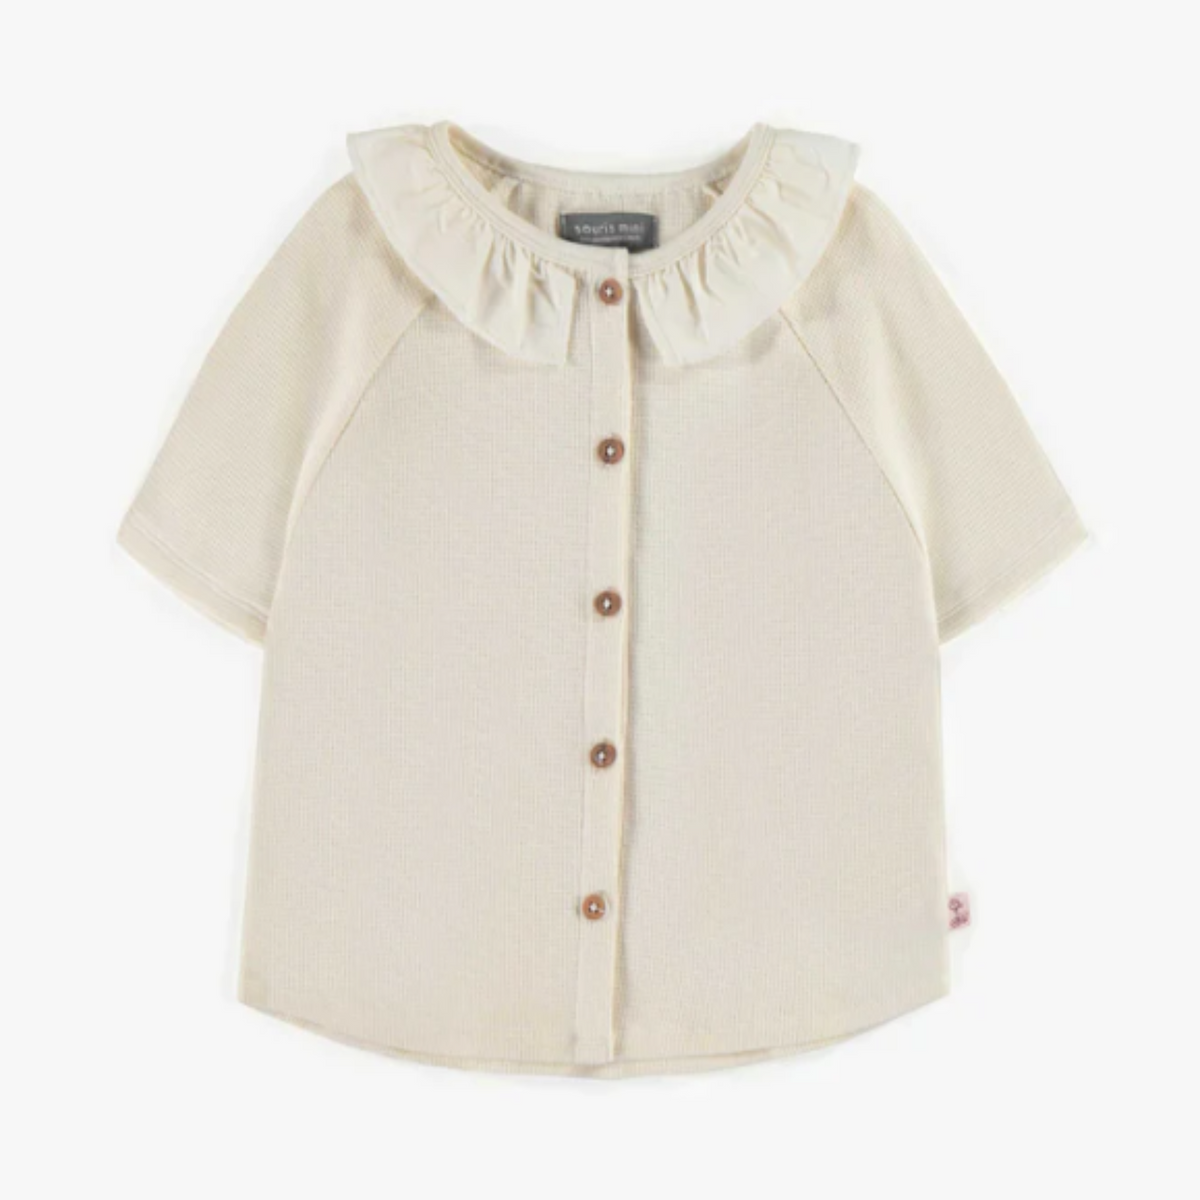 Cream short-sleeved t-shirt in waffle jersey, child